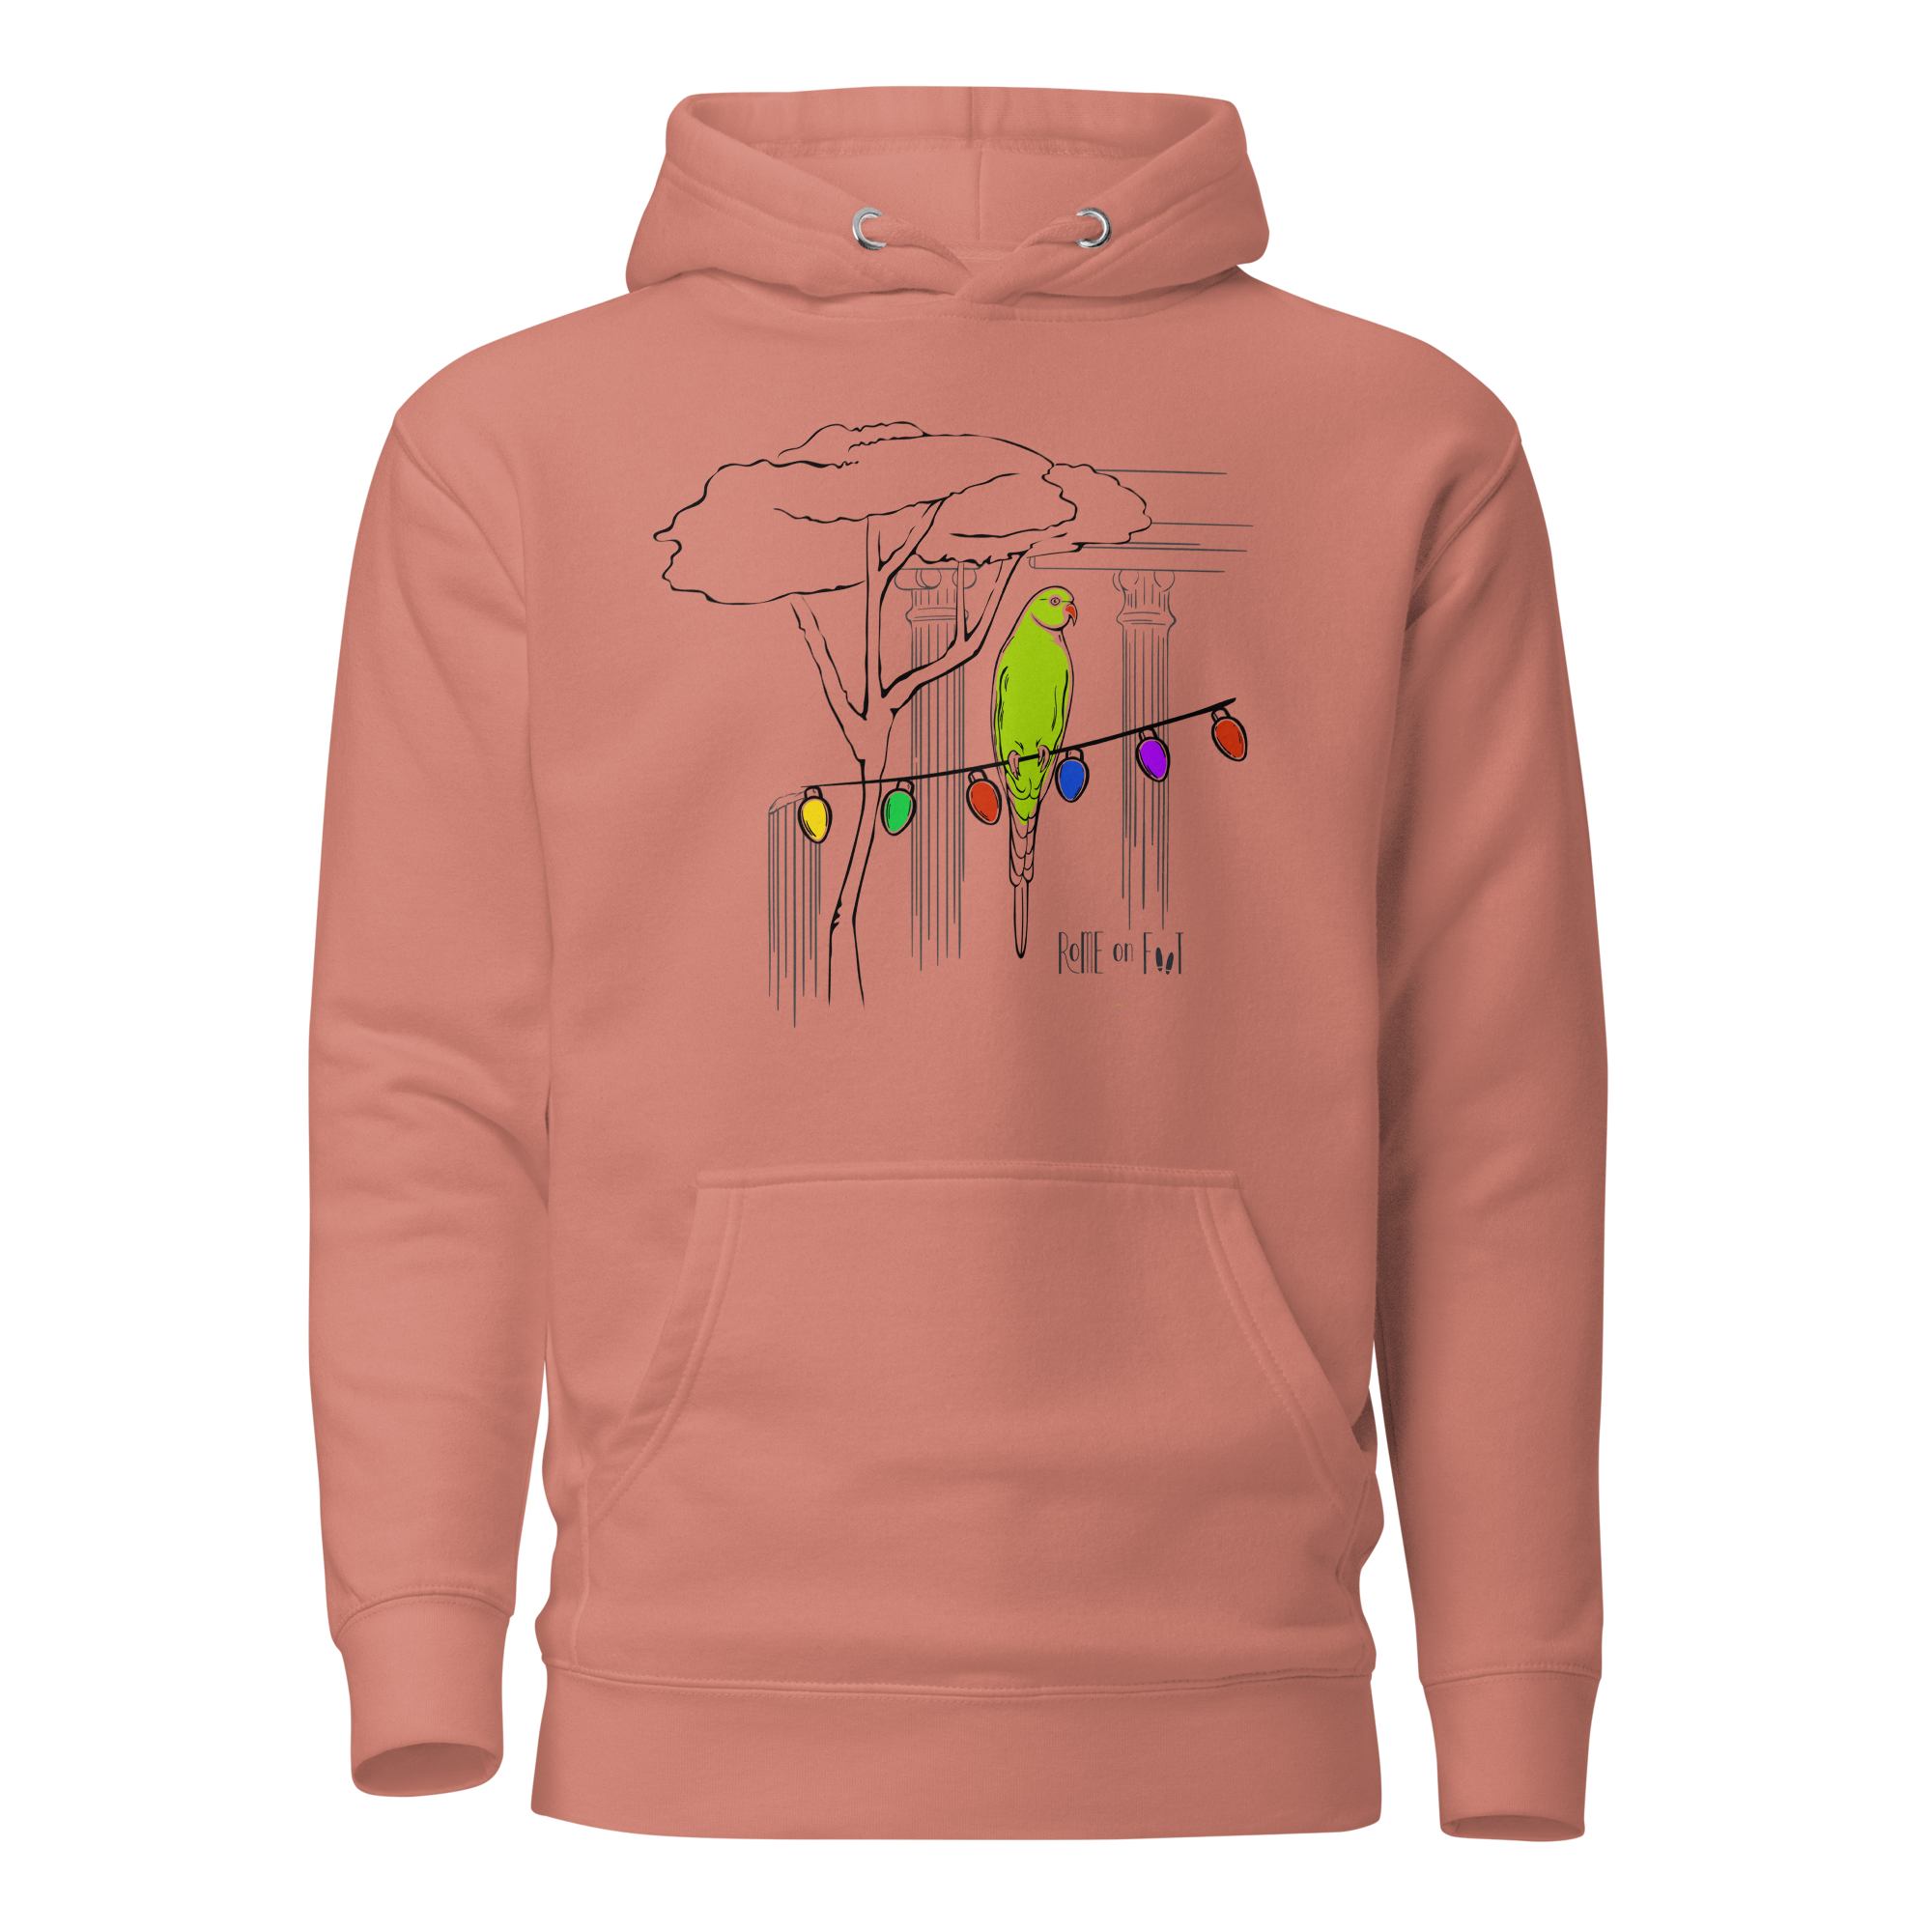 Ultra-Soft Parrots in Rome Holiday Hoodie with Chic Streetwear Design